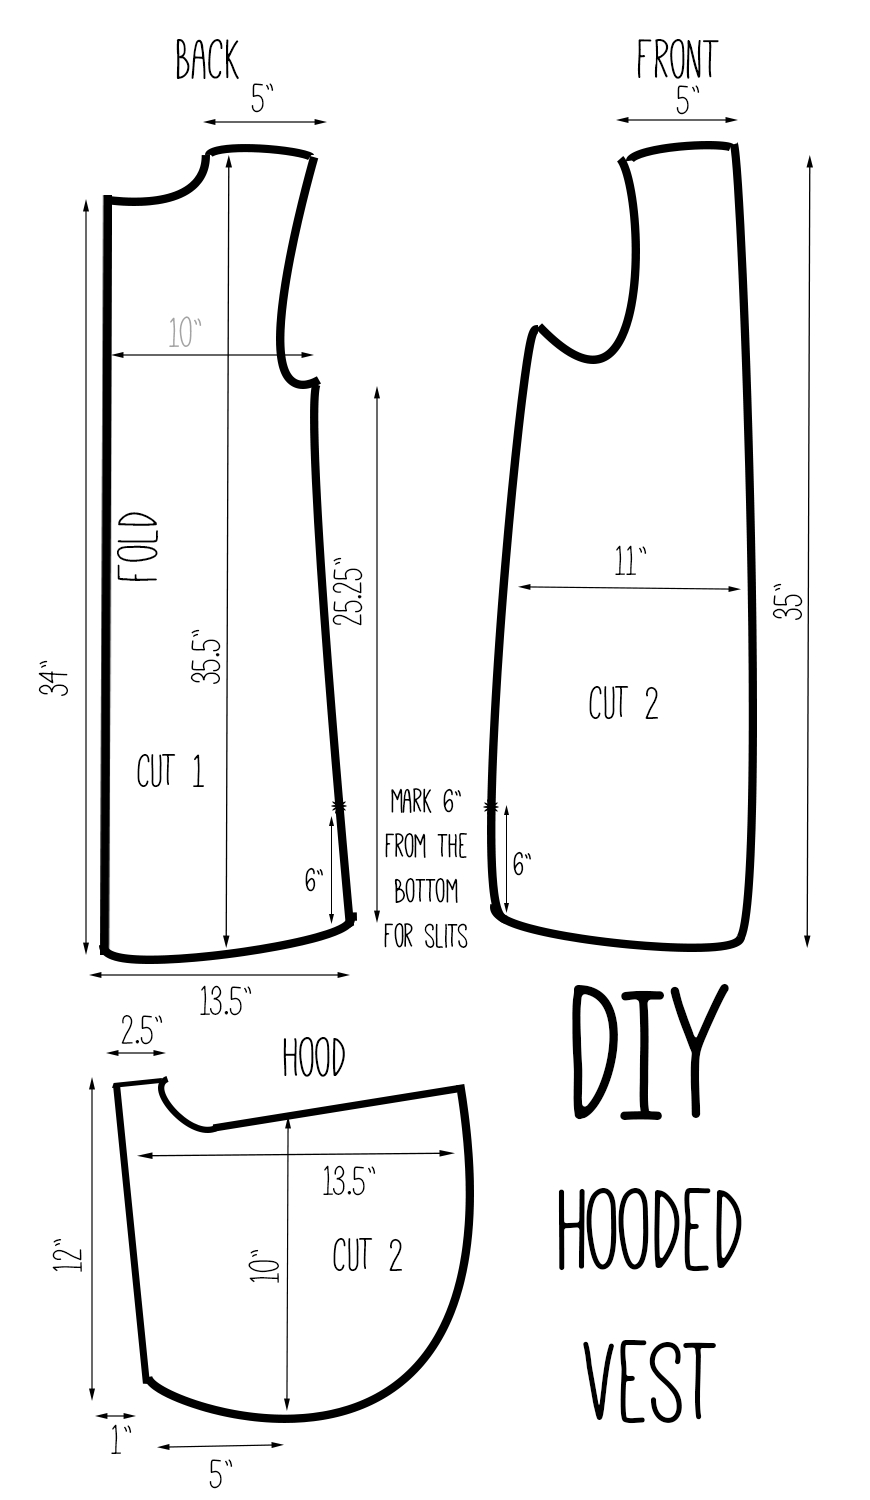 Vest Sewing Pattern Diy Hooded Vest Drafting Pinterest Sewing Sewing Projects I